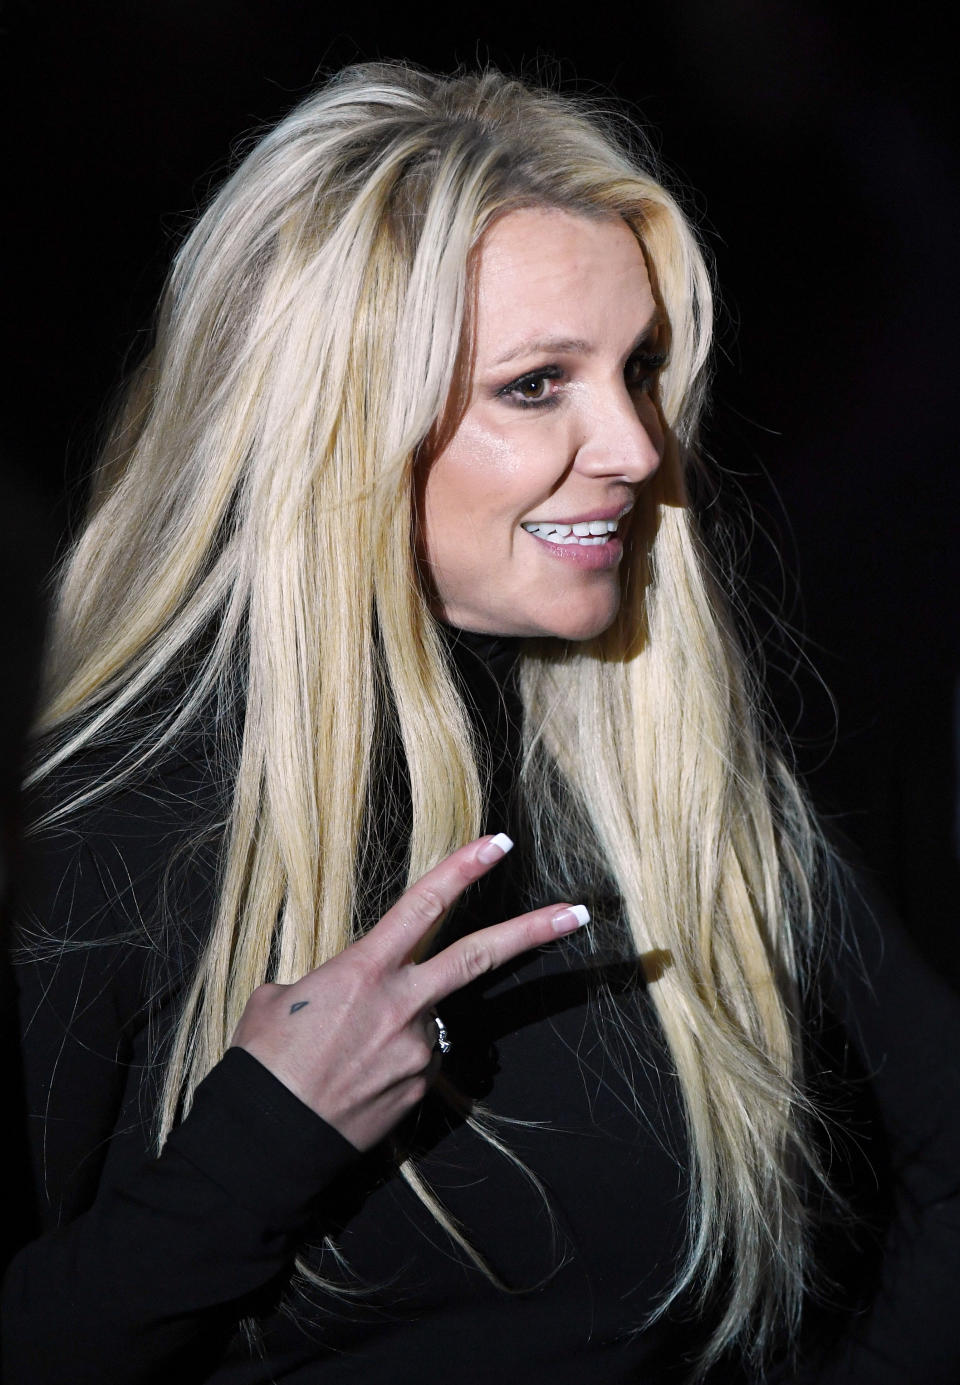 Britney Spears Is Reportedly ‘Dangerously Unstable’ After Settling Legal Dispute With Dad Jamie Spears